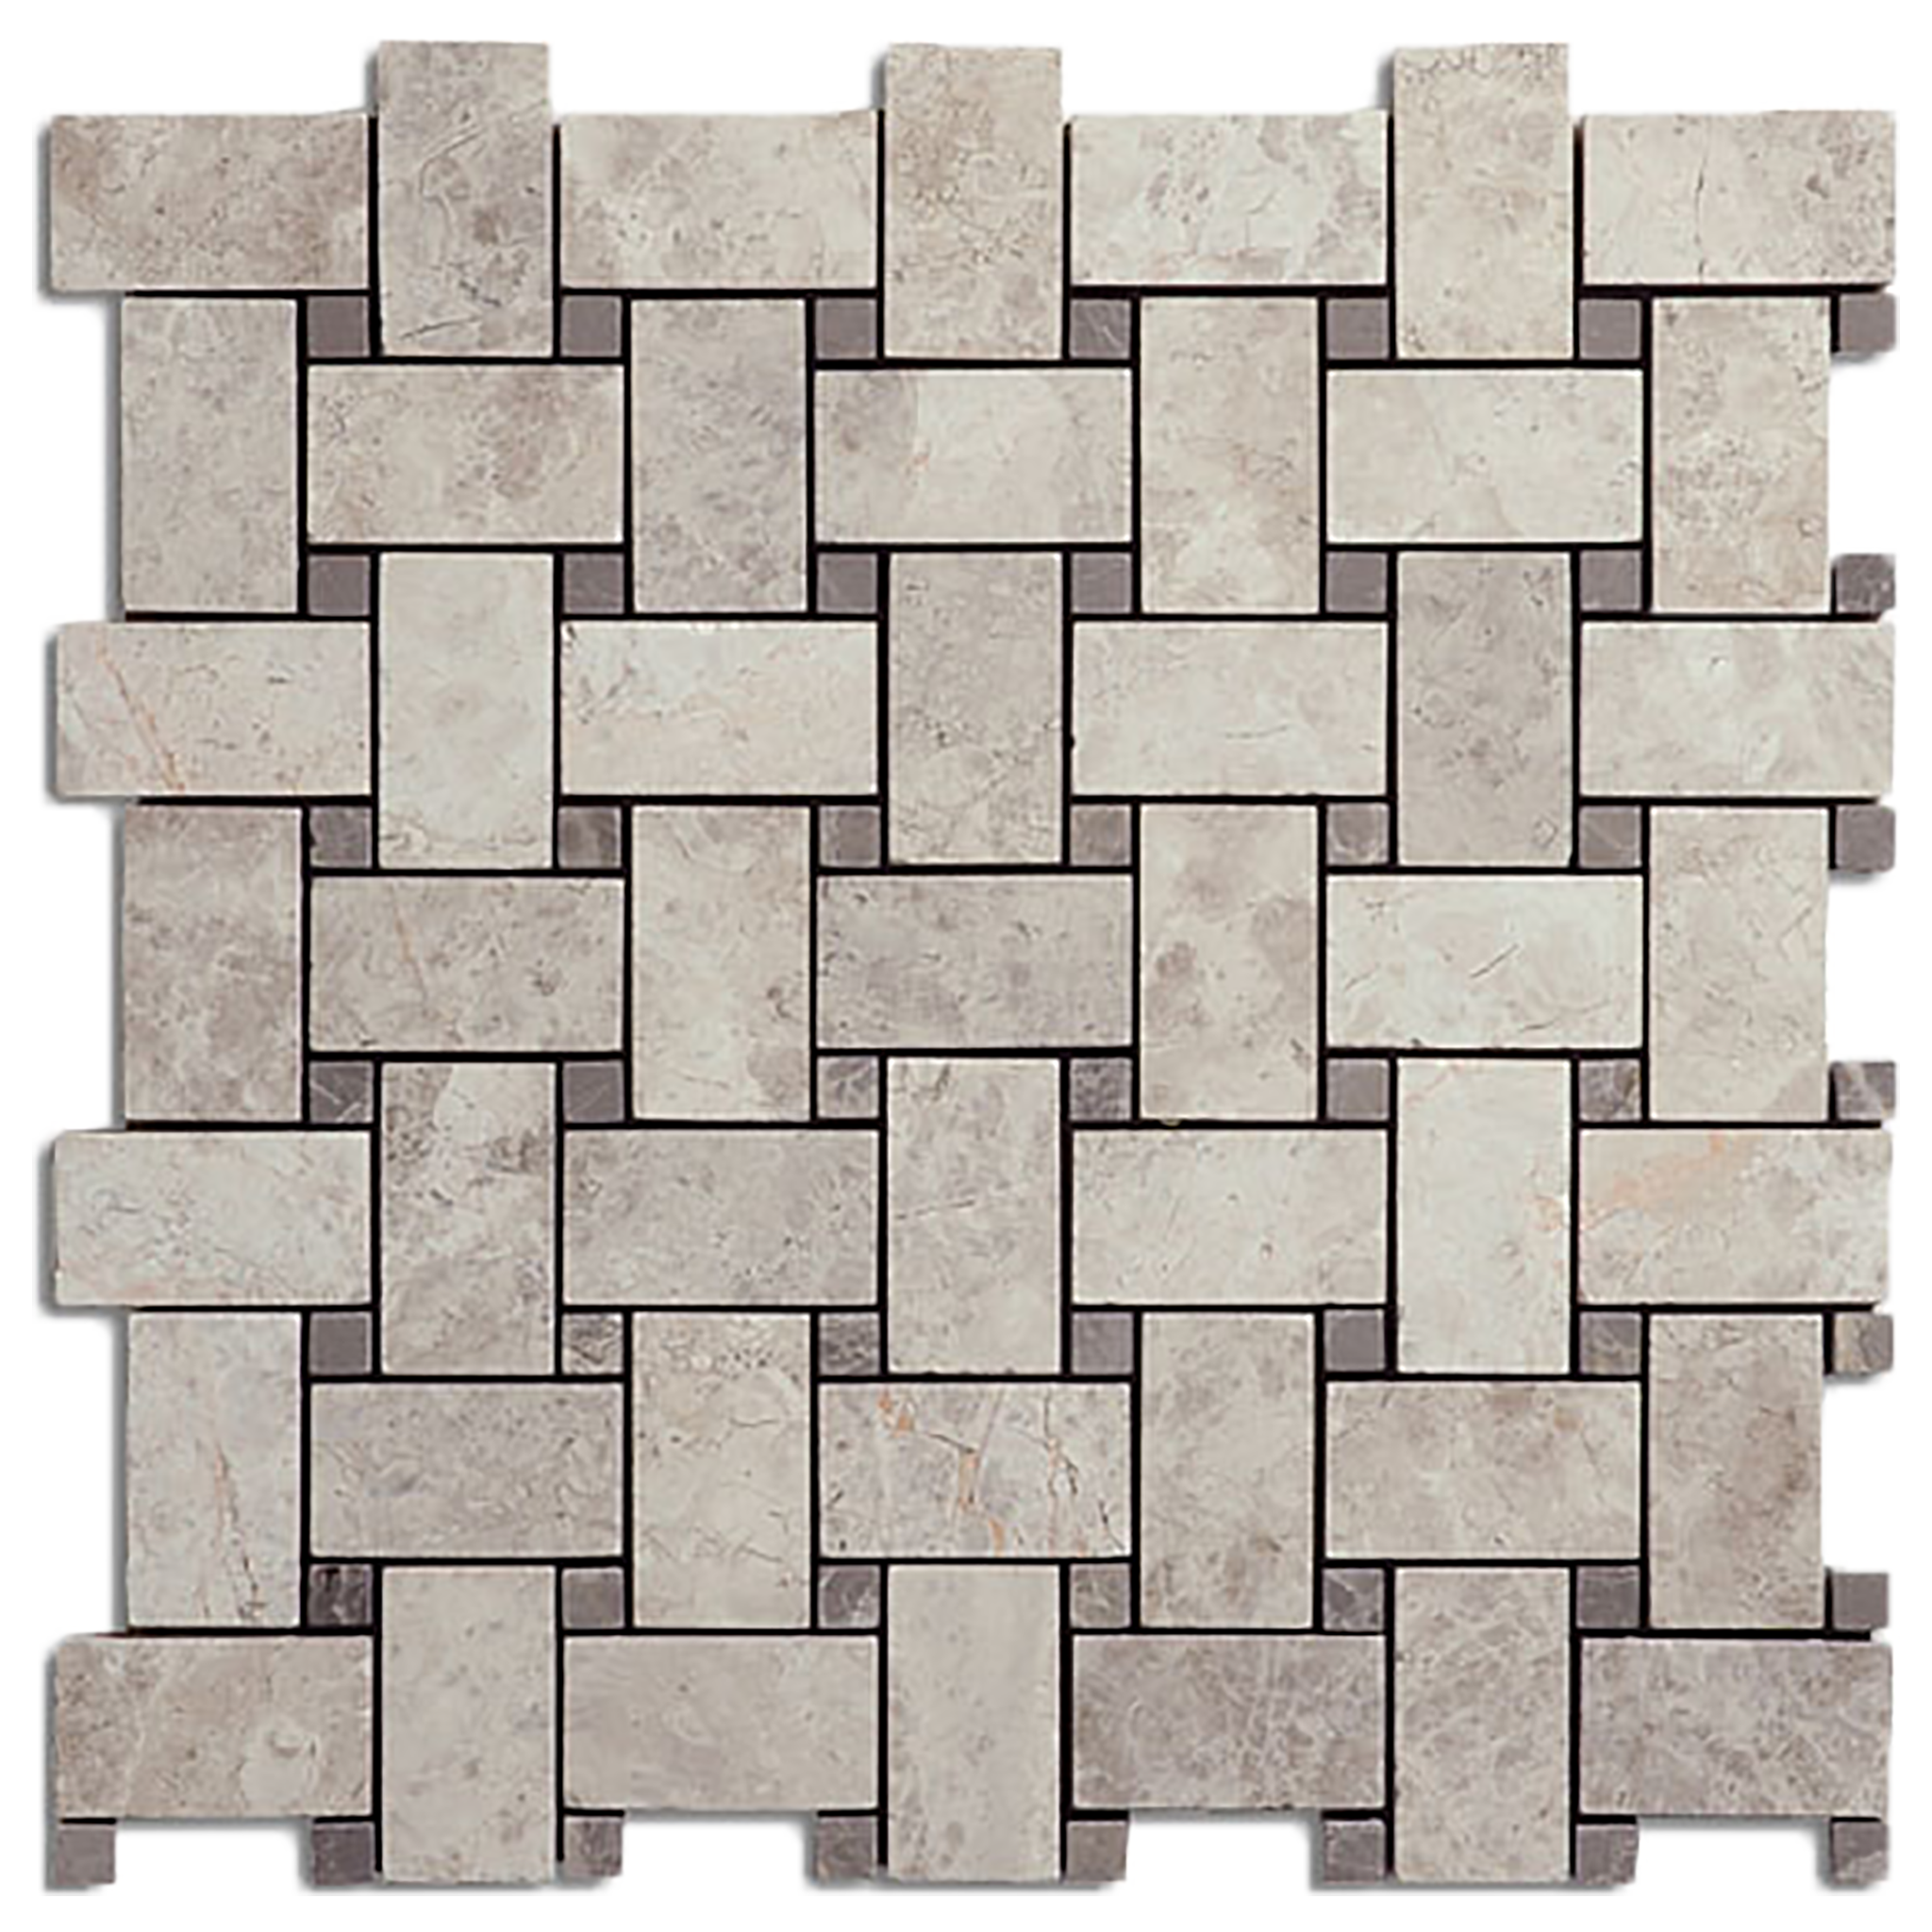 1-1/4"x2" Silver Shadow Marble Basketweave w/Royal Grey Mosaic Tile - Honed Honed / 1-1/4" x 2" - DW TILE & STONE - Atlanta Marble Natural Stone Wholesale Stone Supplier